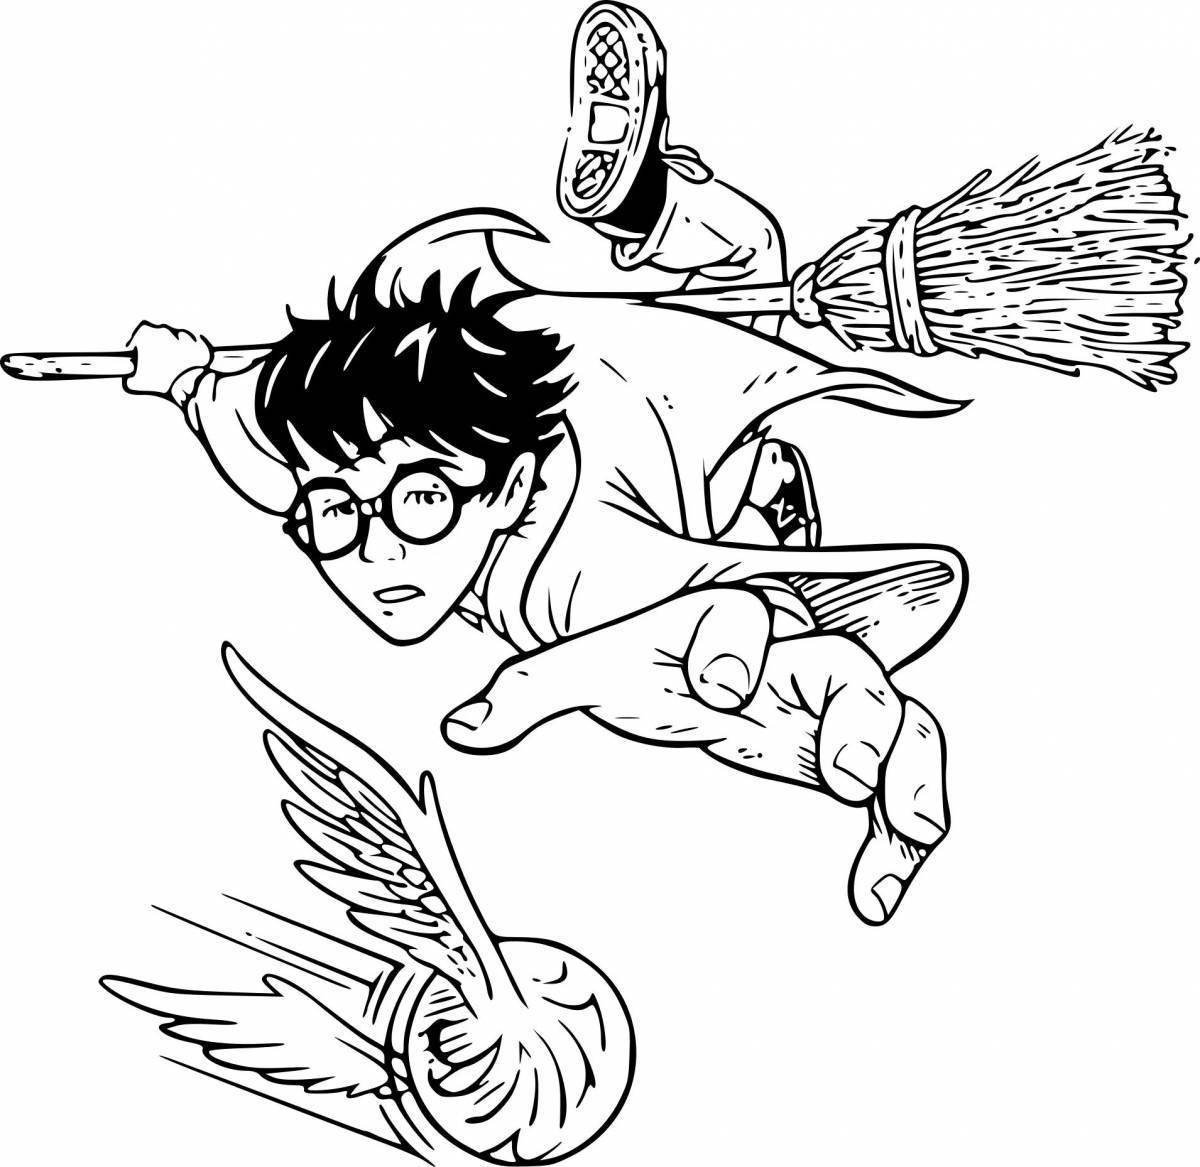 Royal coloring harry potter and the philosopher's stone